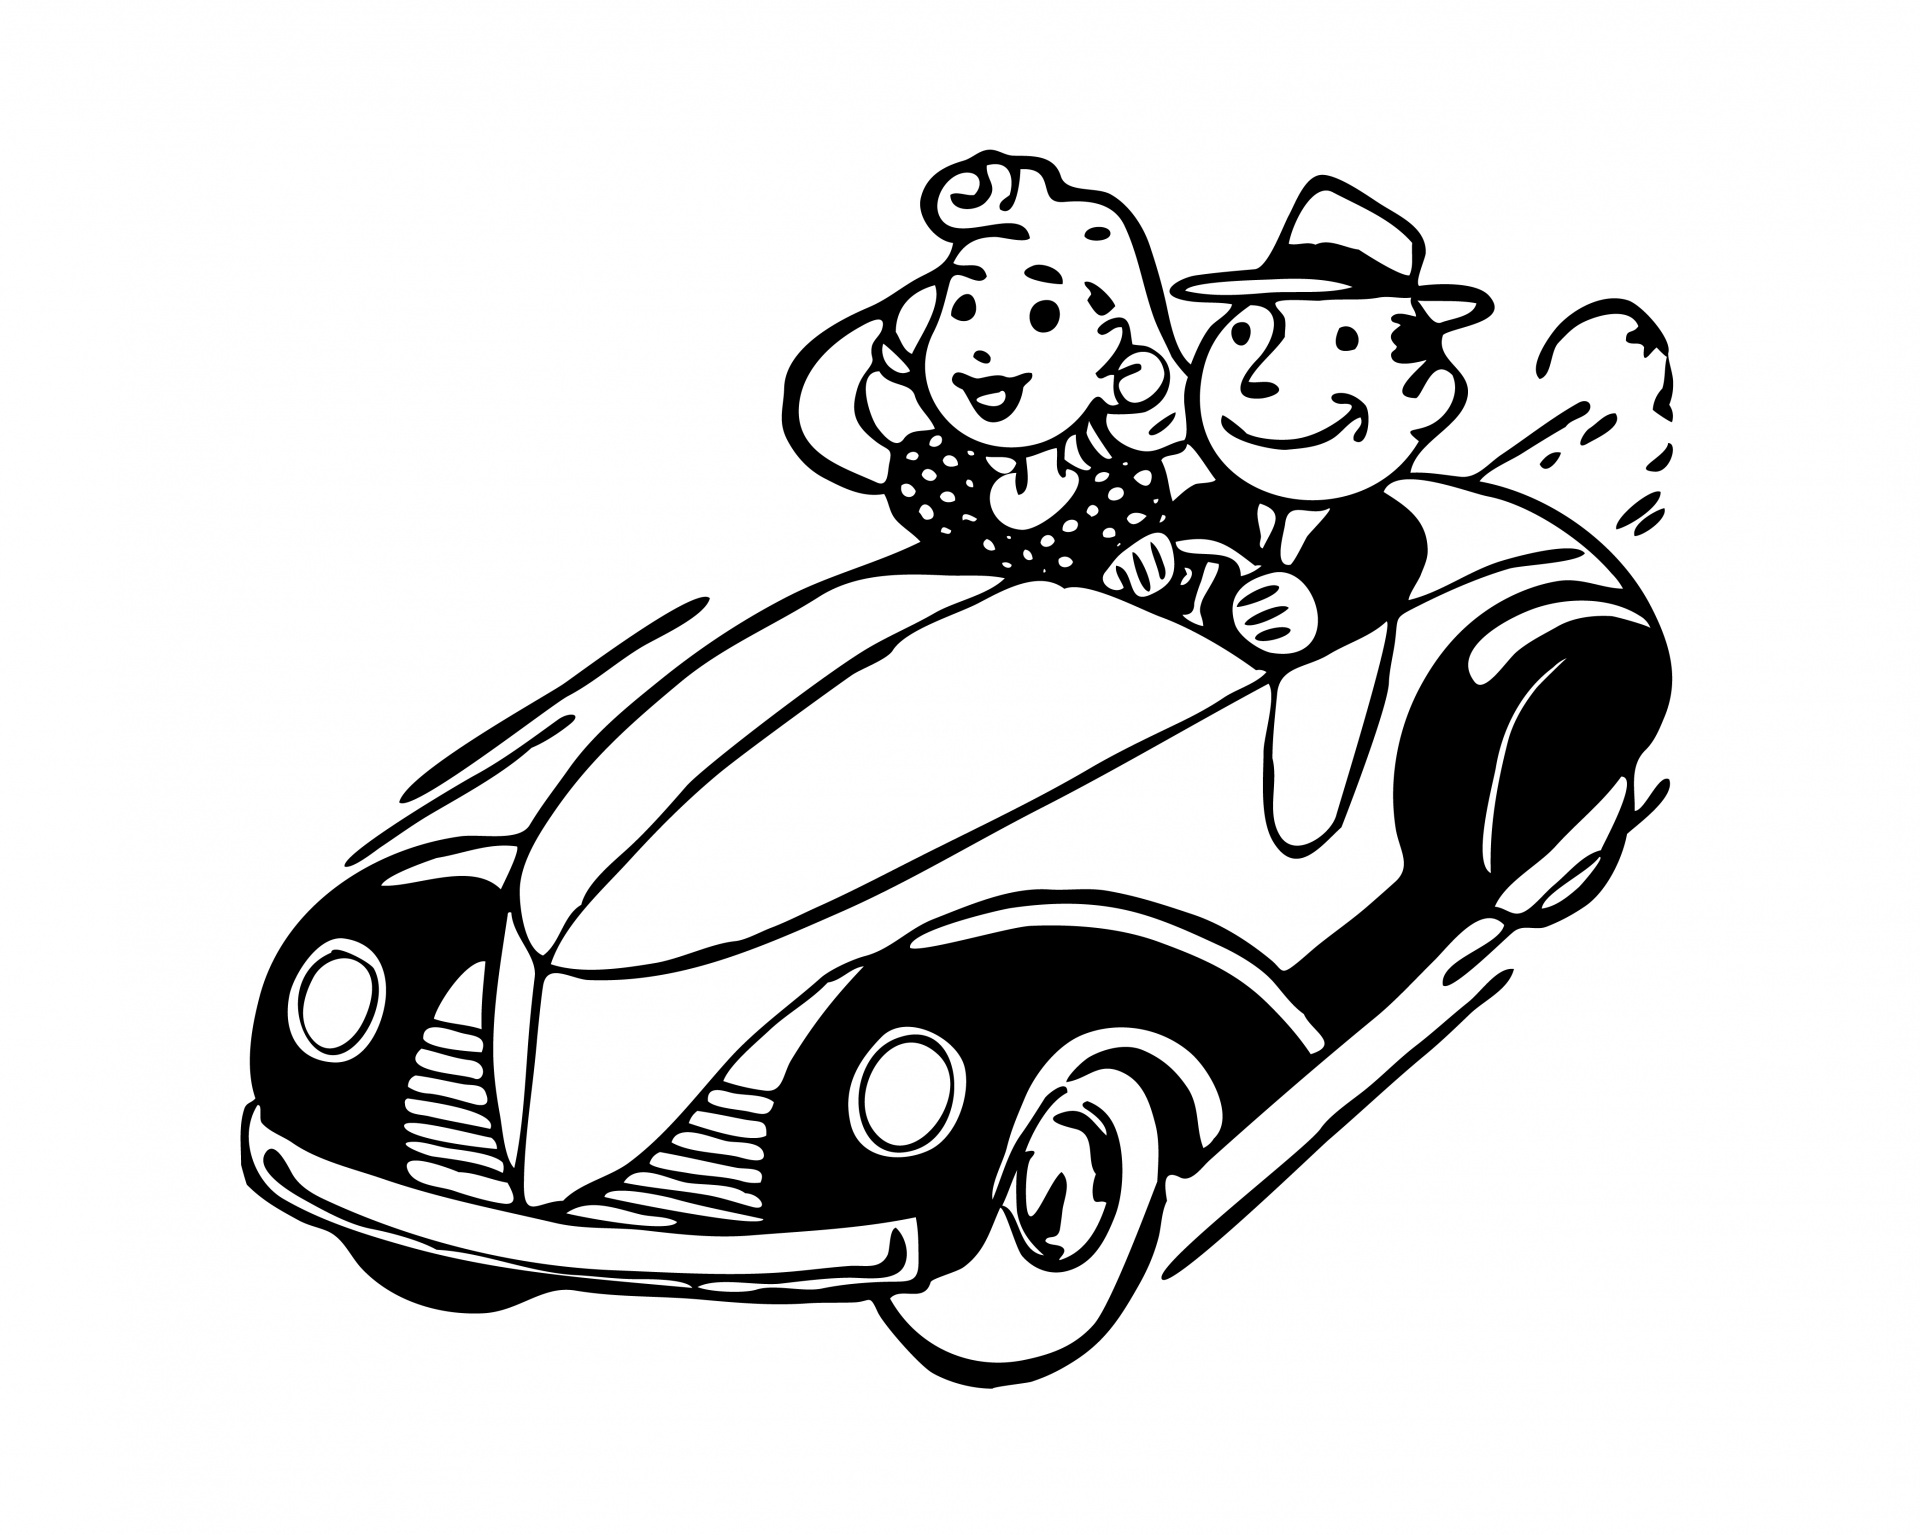 Man and woman in vintage car illustration